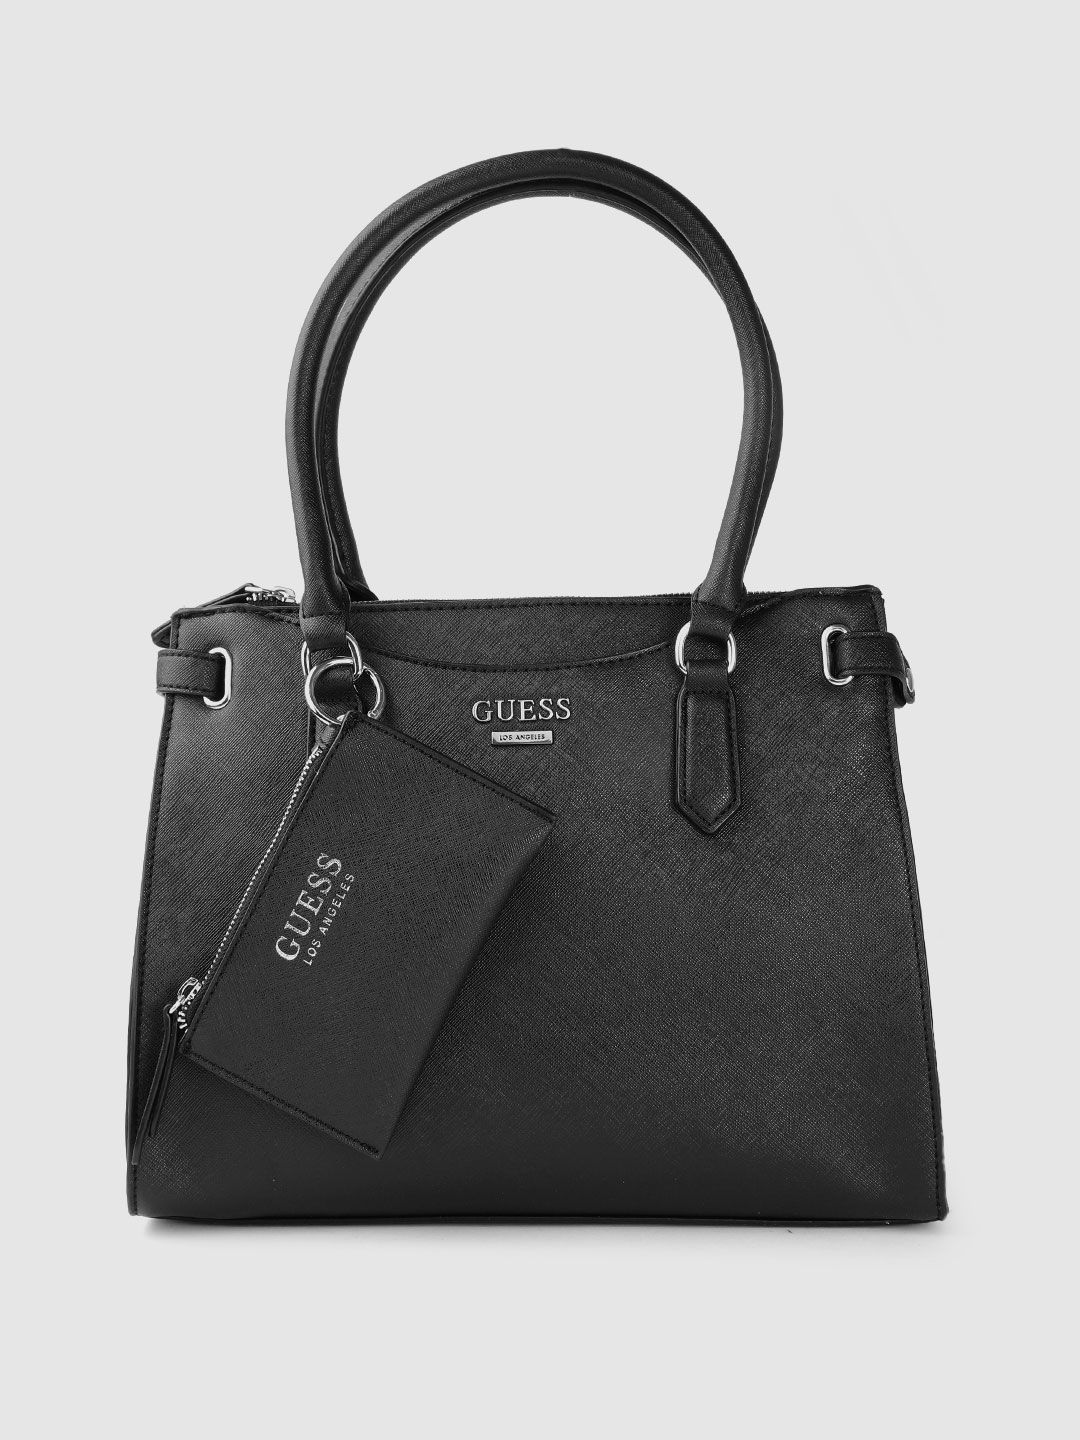 GUESS Women Black Solid Structured Handheld Bag Price in India